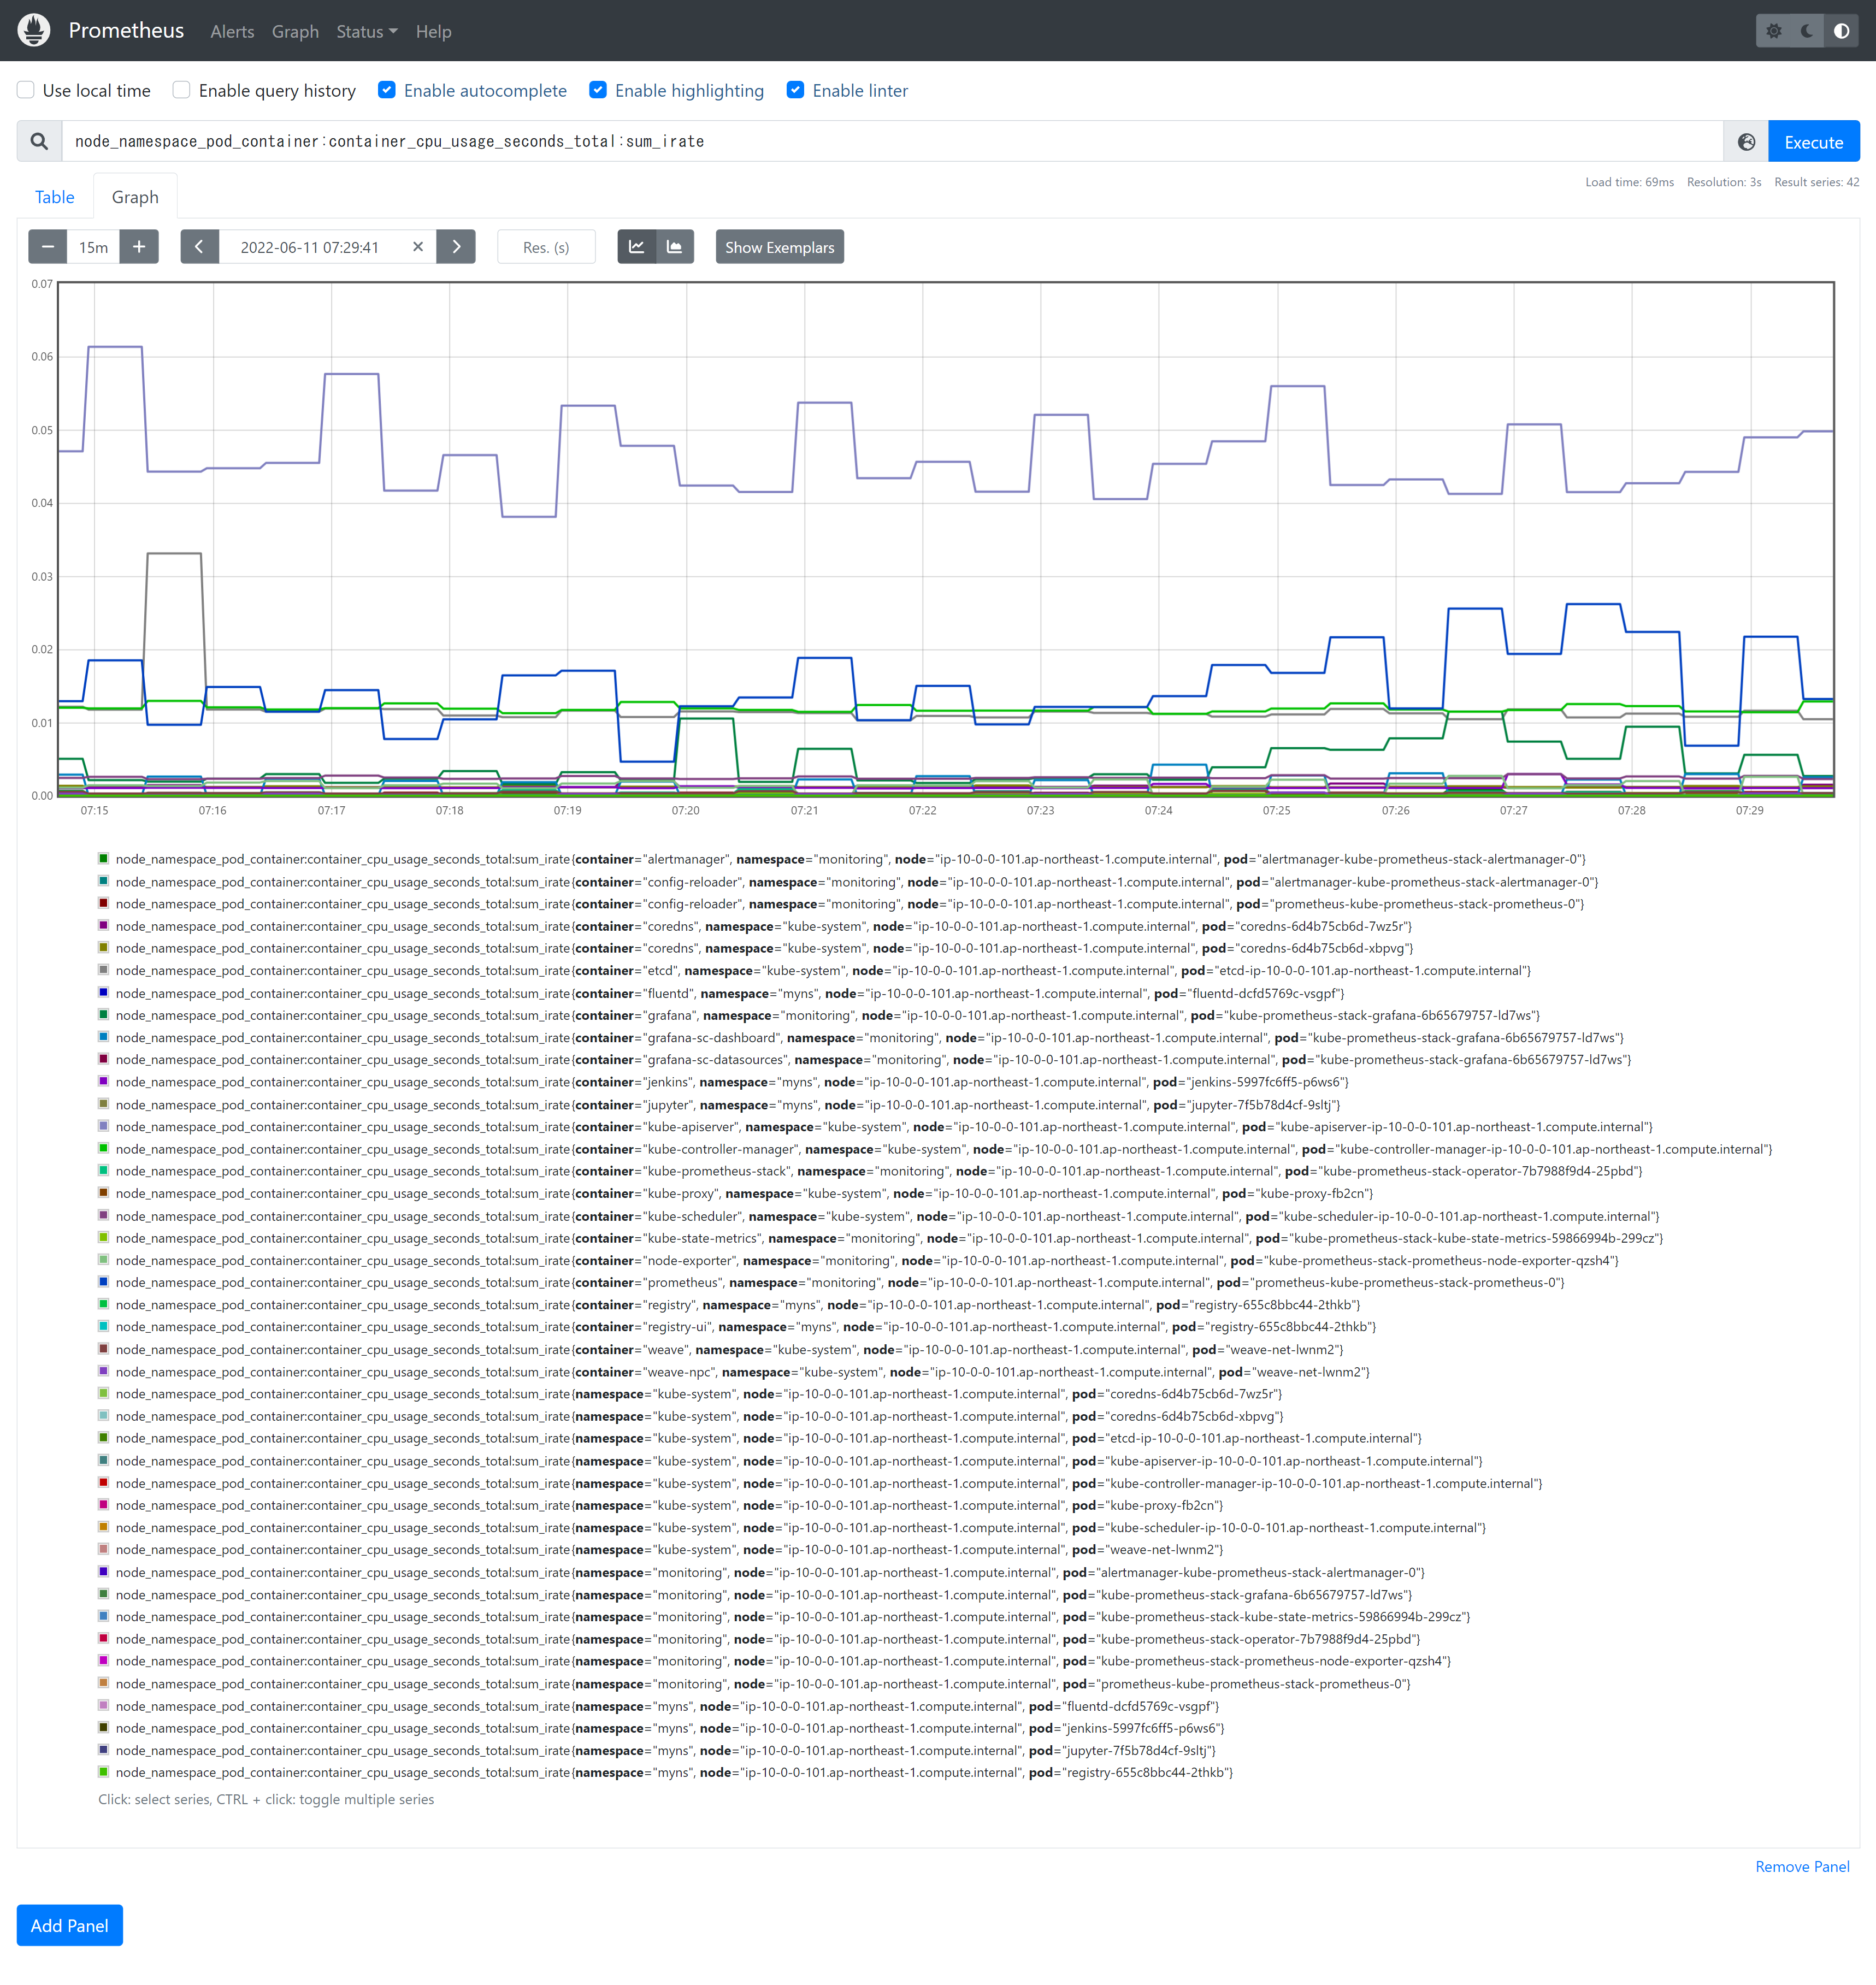 localhost_9090_graph_g0.expr=node_namespace_pod_container%3Acontainer_cpu_usage_seconds_total%3Asum_irate&g0.tab=0&g0.stacked=0&g0.show_exemplars=0&g0.range_input=15m&g0.end_input=2022-06-11%2007.png